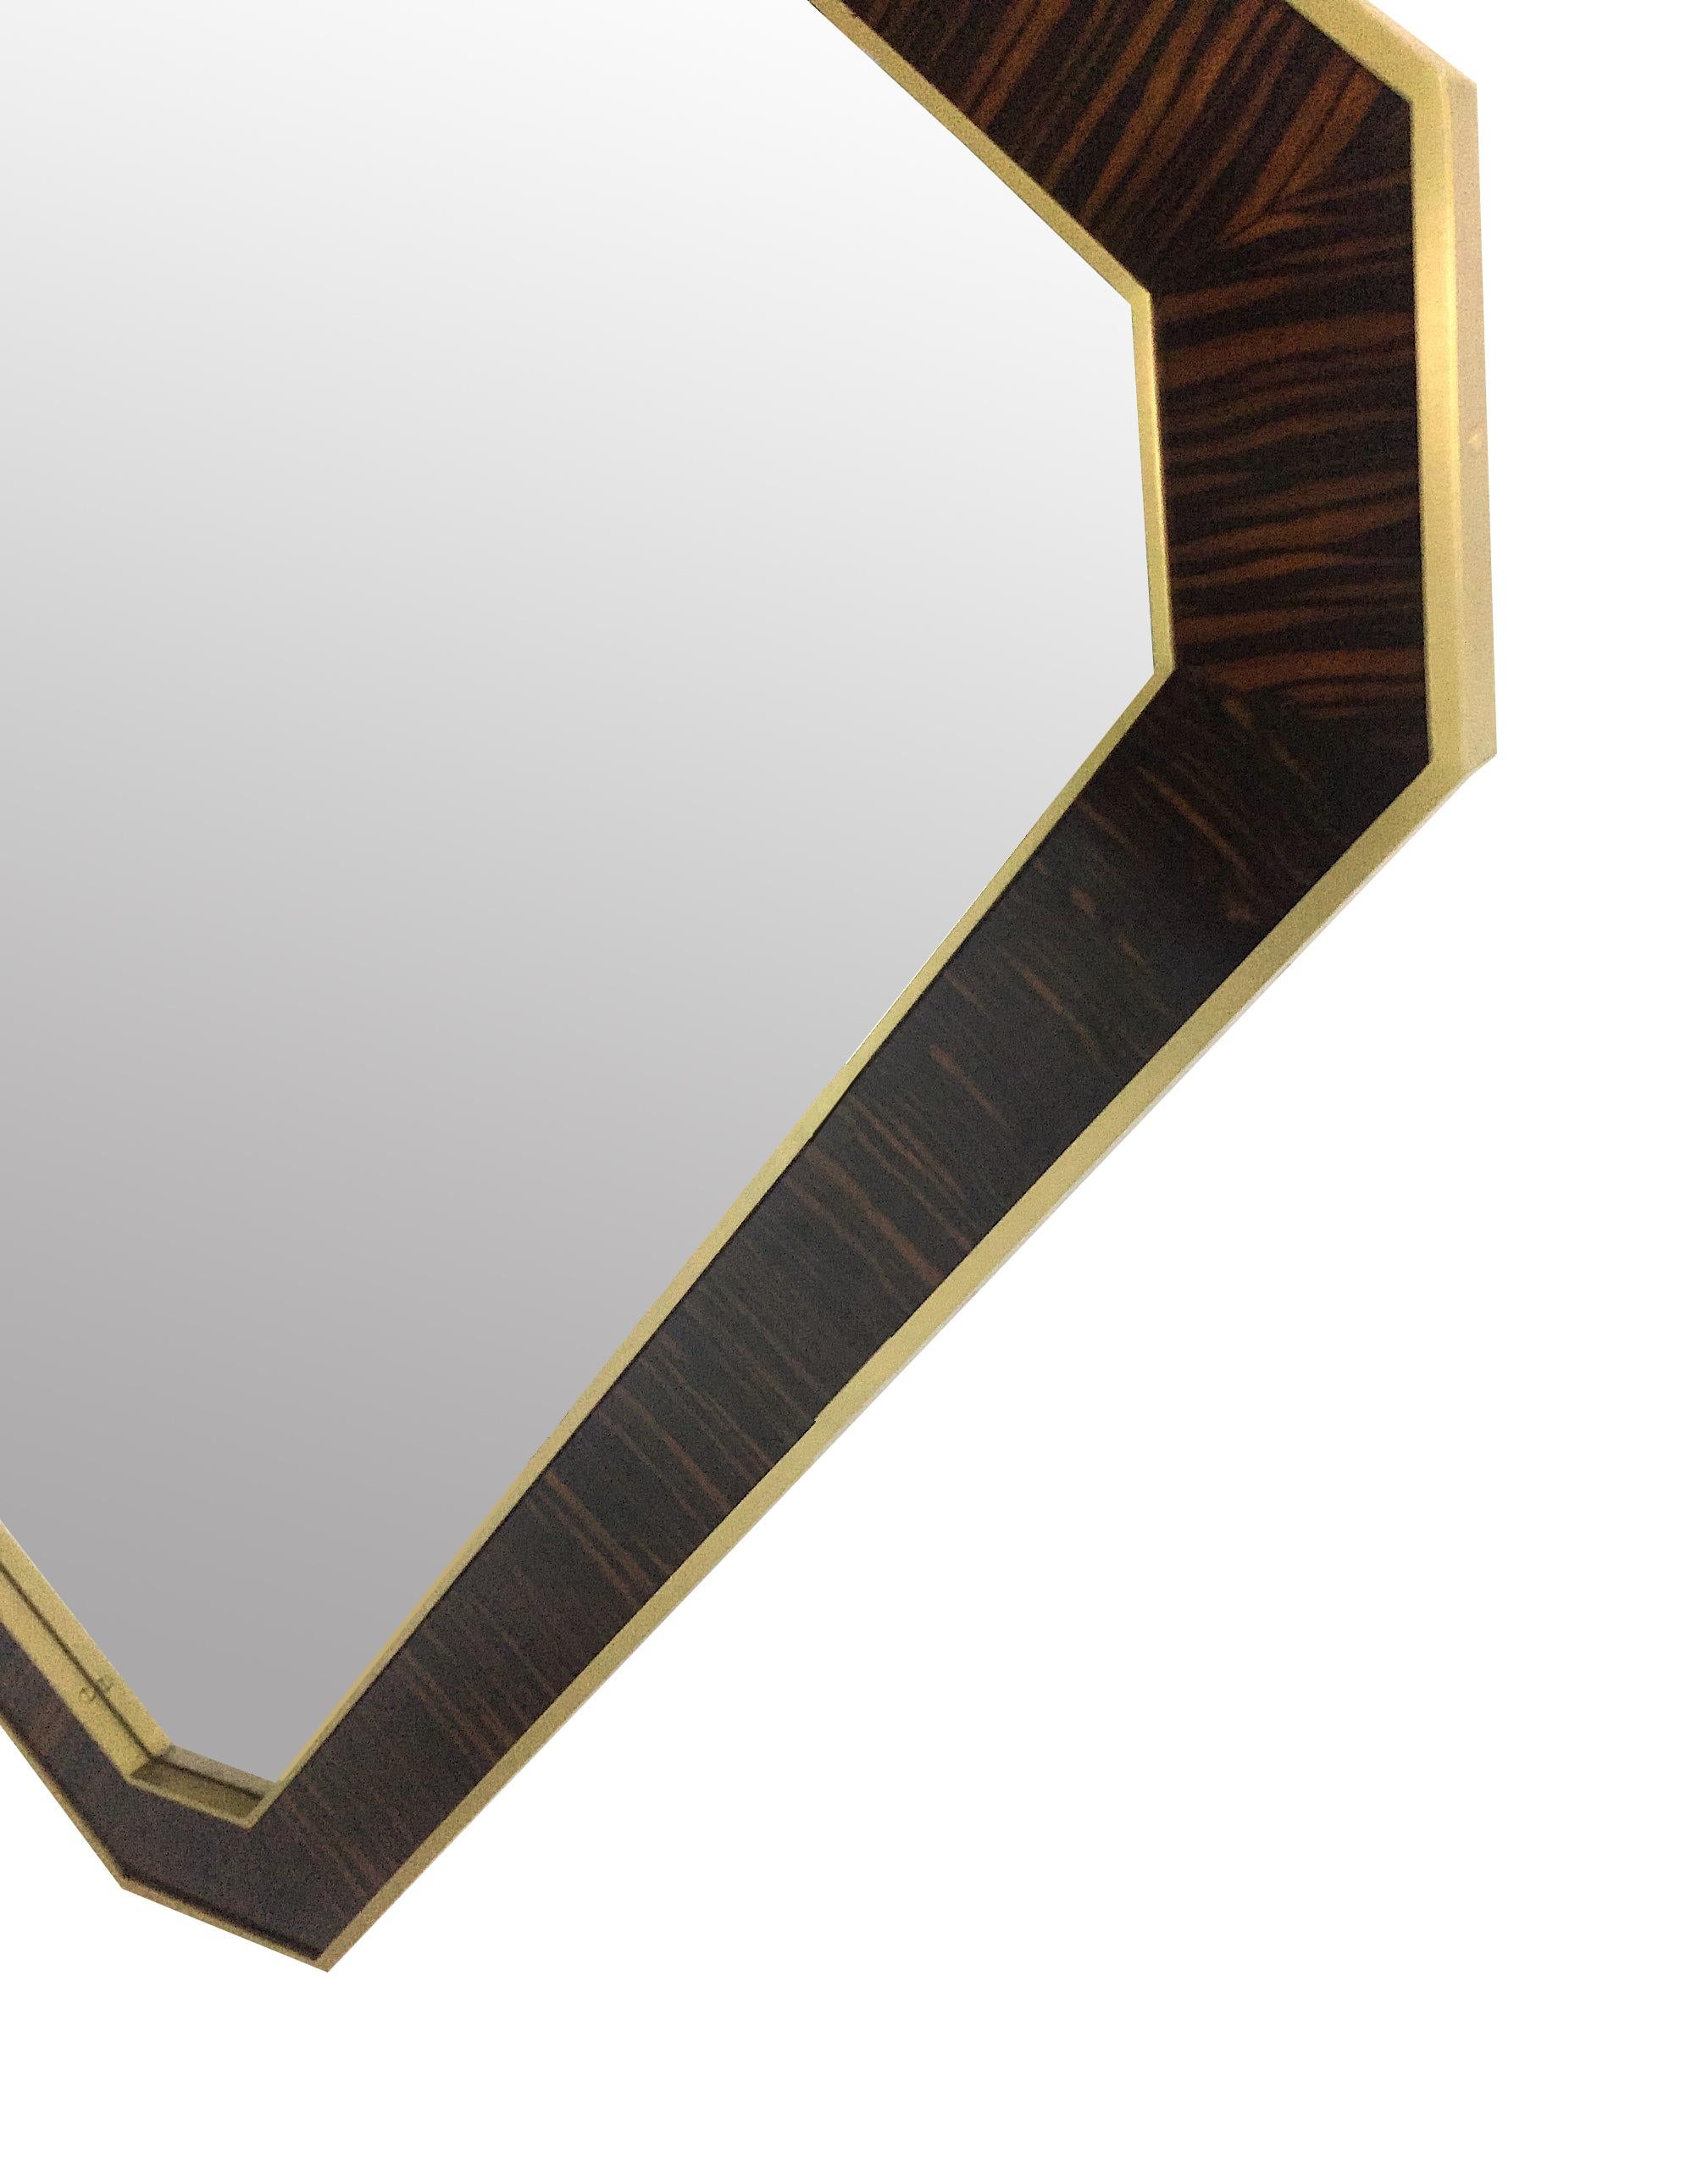 Veneer Mirror Classic Modern Style in Macassar Ebony and Brass, in Stock For Sale